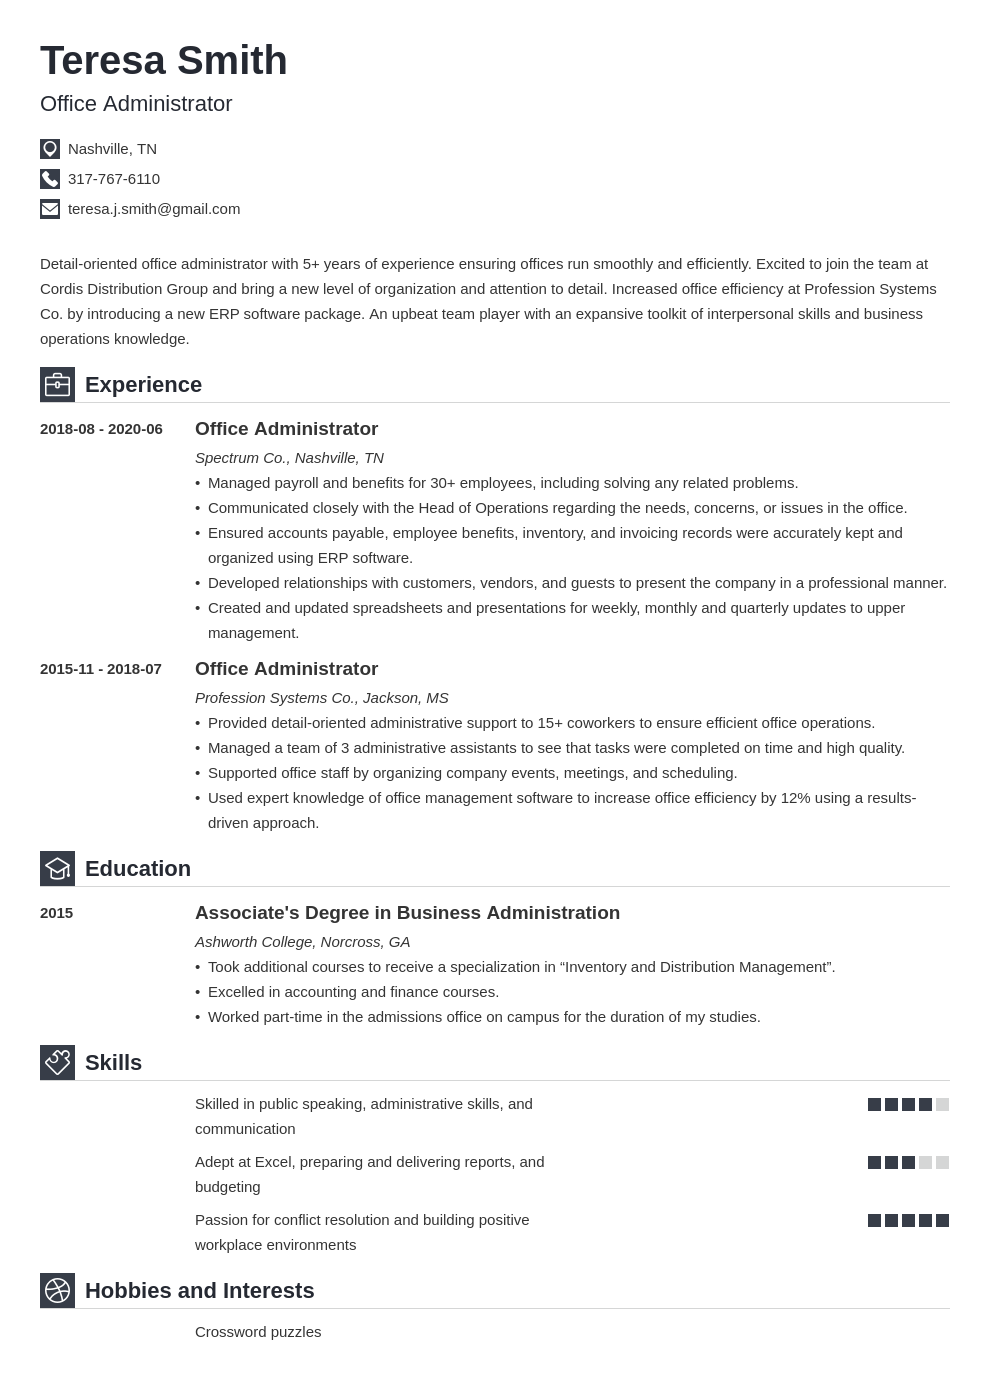 Office Administrator Resume Examples and Guide [20+ Tips]